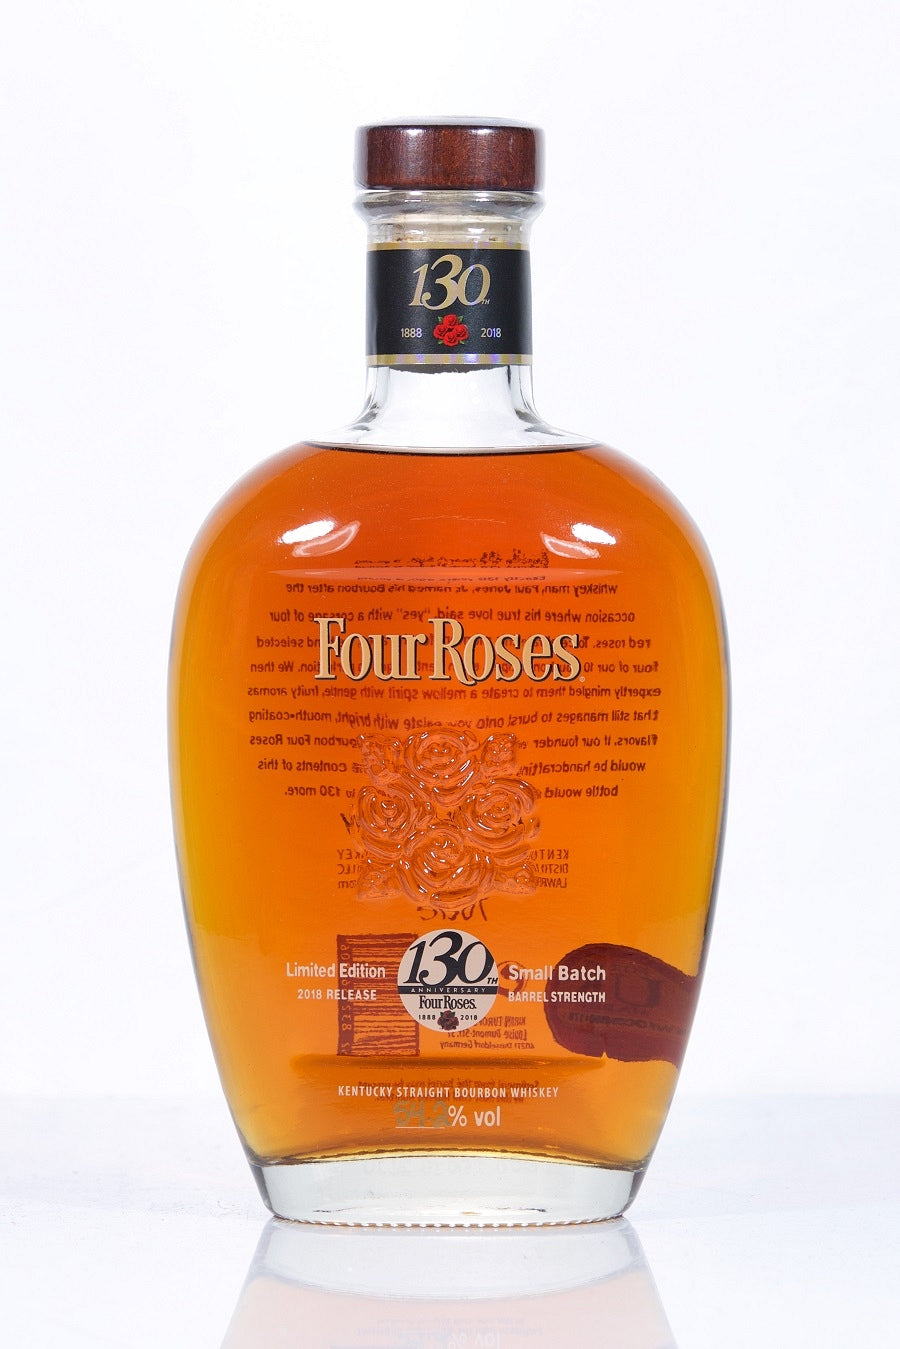 Four Roses 2018 Limited Edition 130th Anniversary Edition